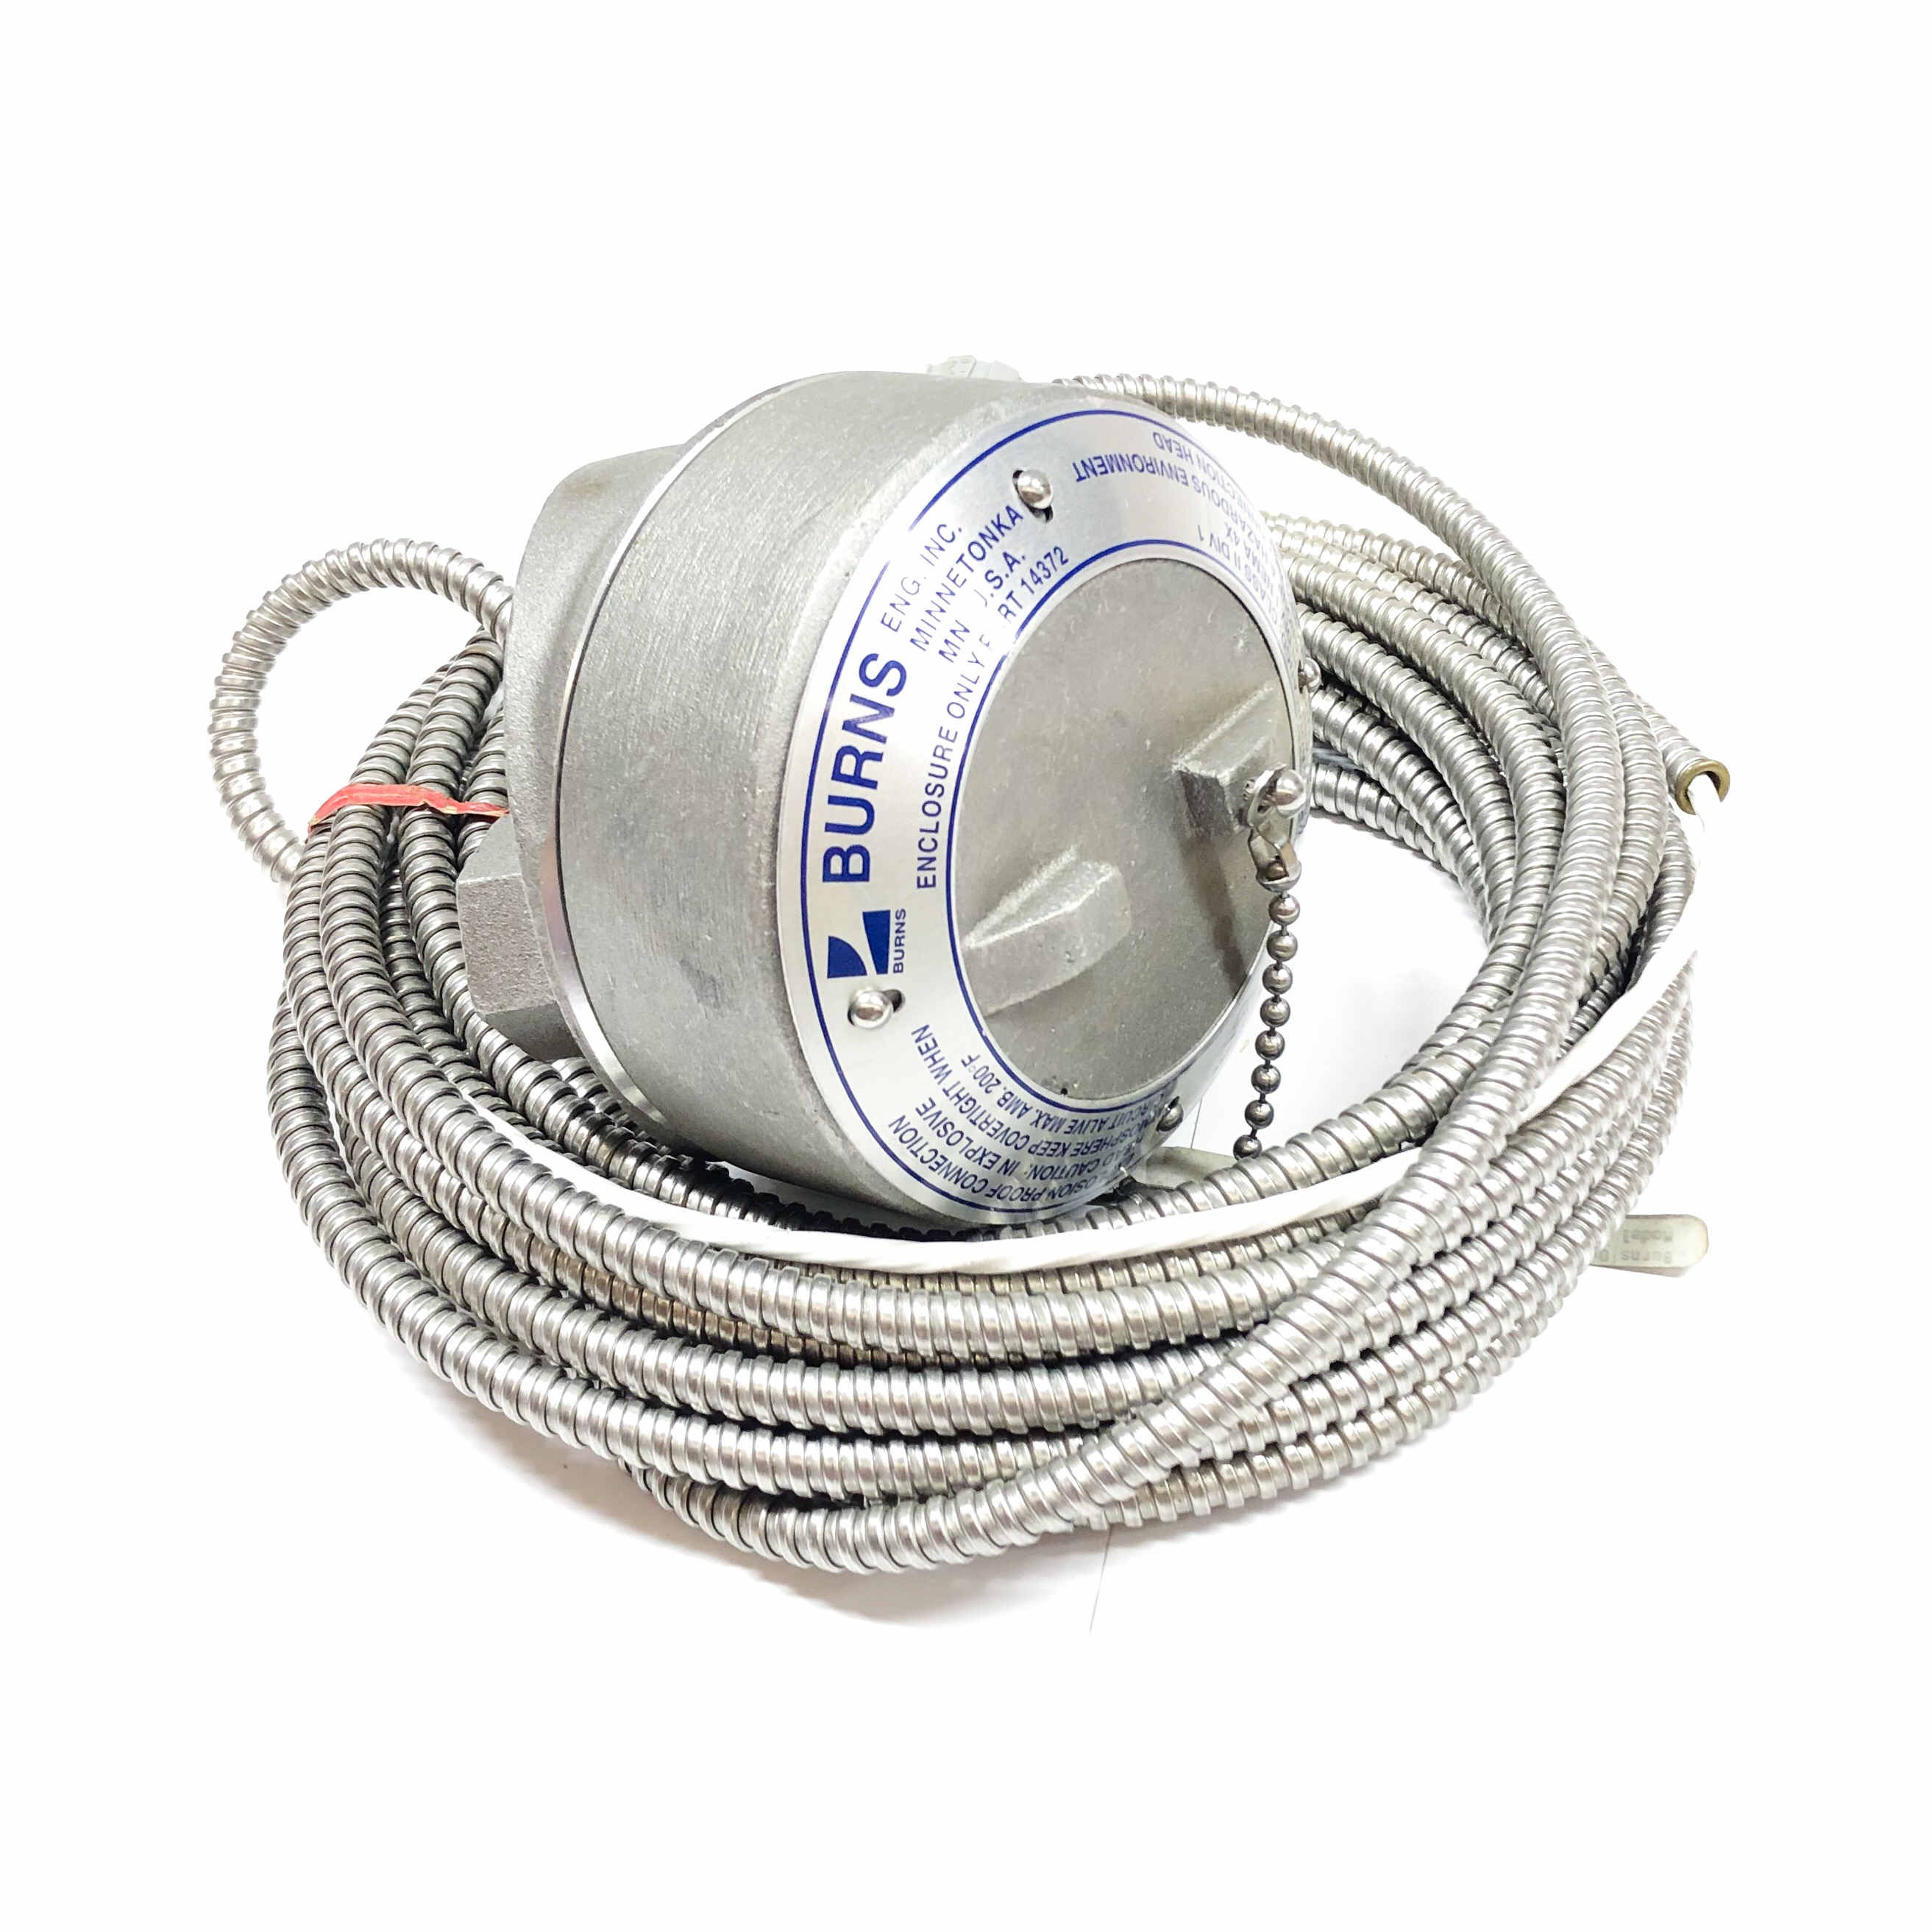 14372 Burns Explosion Proof Connection Head with Cable, Max Amb 200 Deg F 2